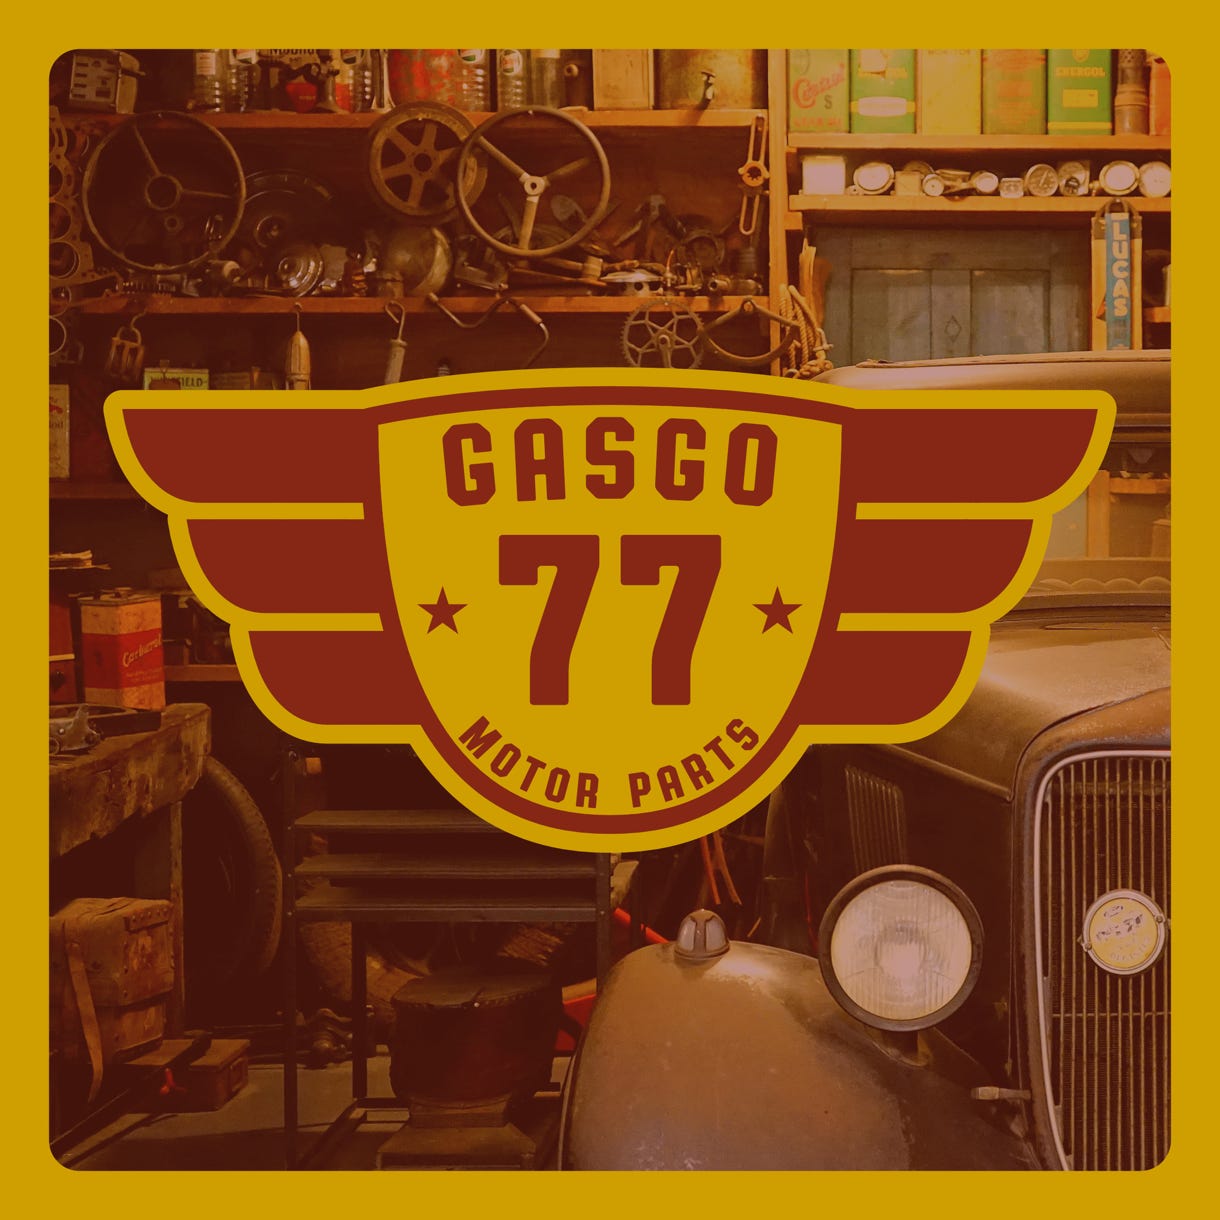 GasGo 77 - Quality Motor Parts Design with Background 